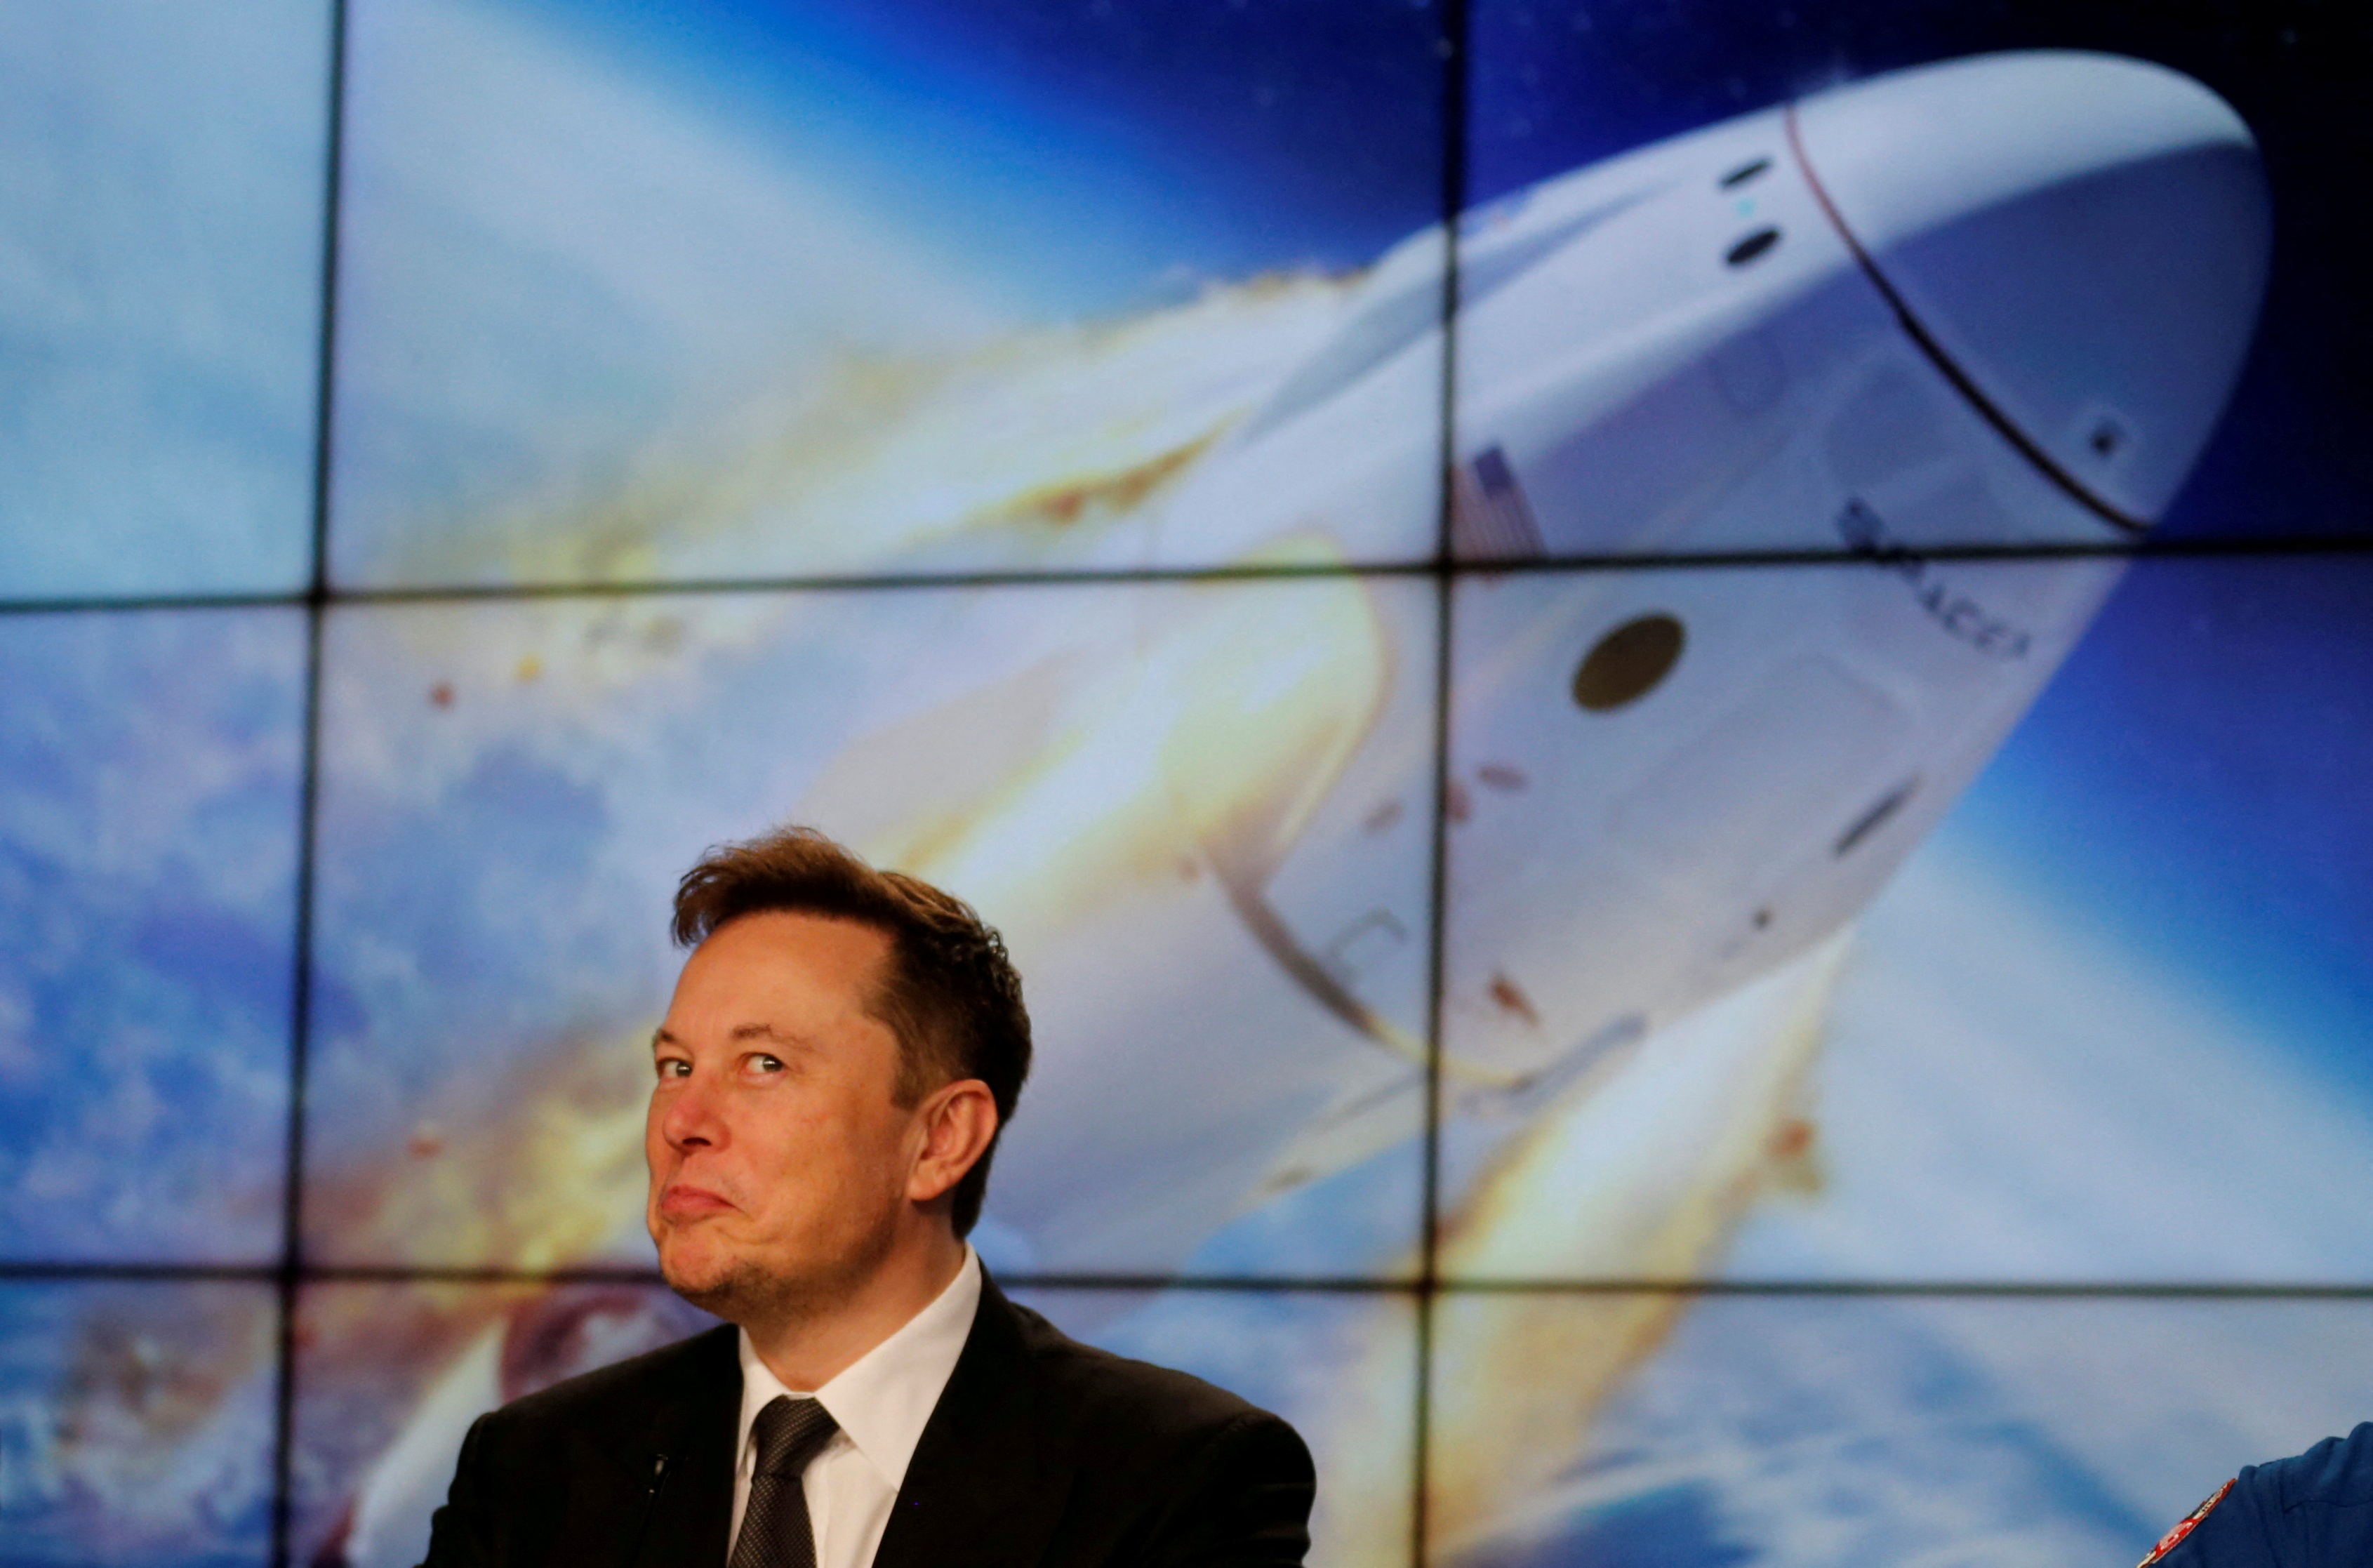 SpaceX founder and chief engineer Elon Musk reacts during a post-launch news conference to discuss the SpaceX Crew Dragon astronaut capsule in-flight abort test at the Kennedy Space Center